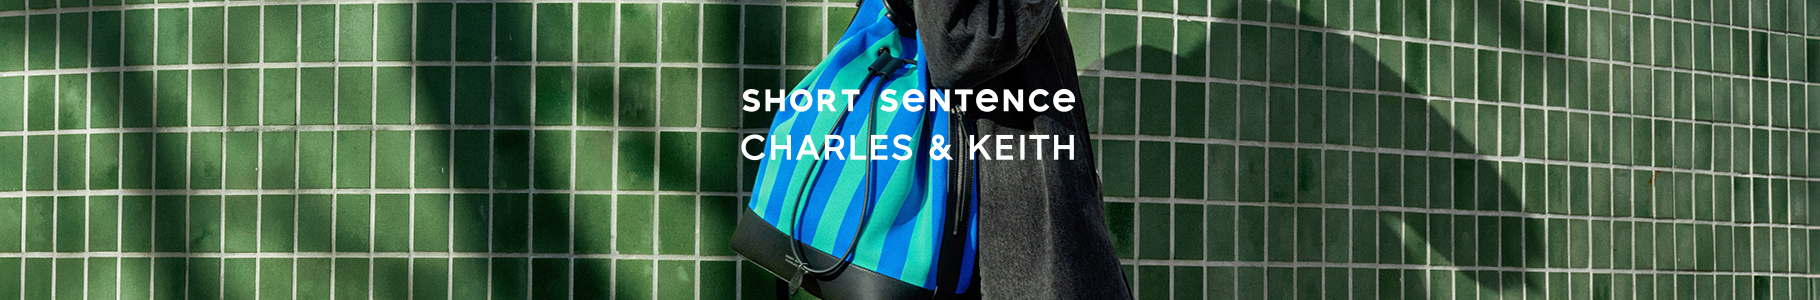 The CHARLES & KEITH x Short Sentence collection